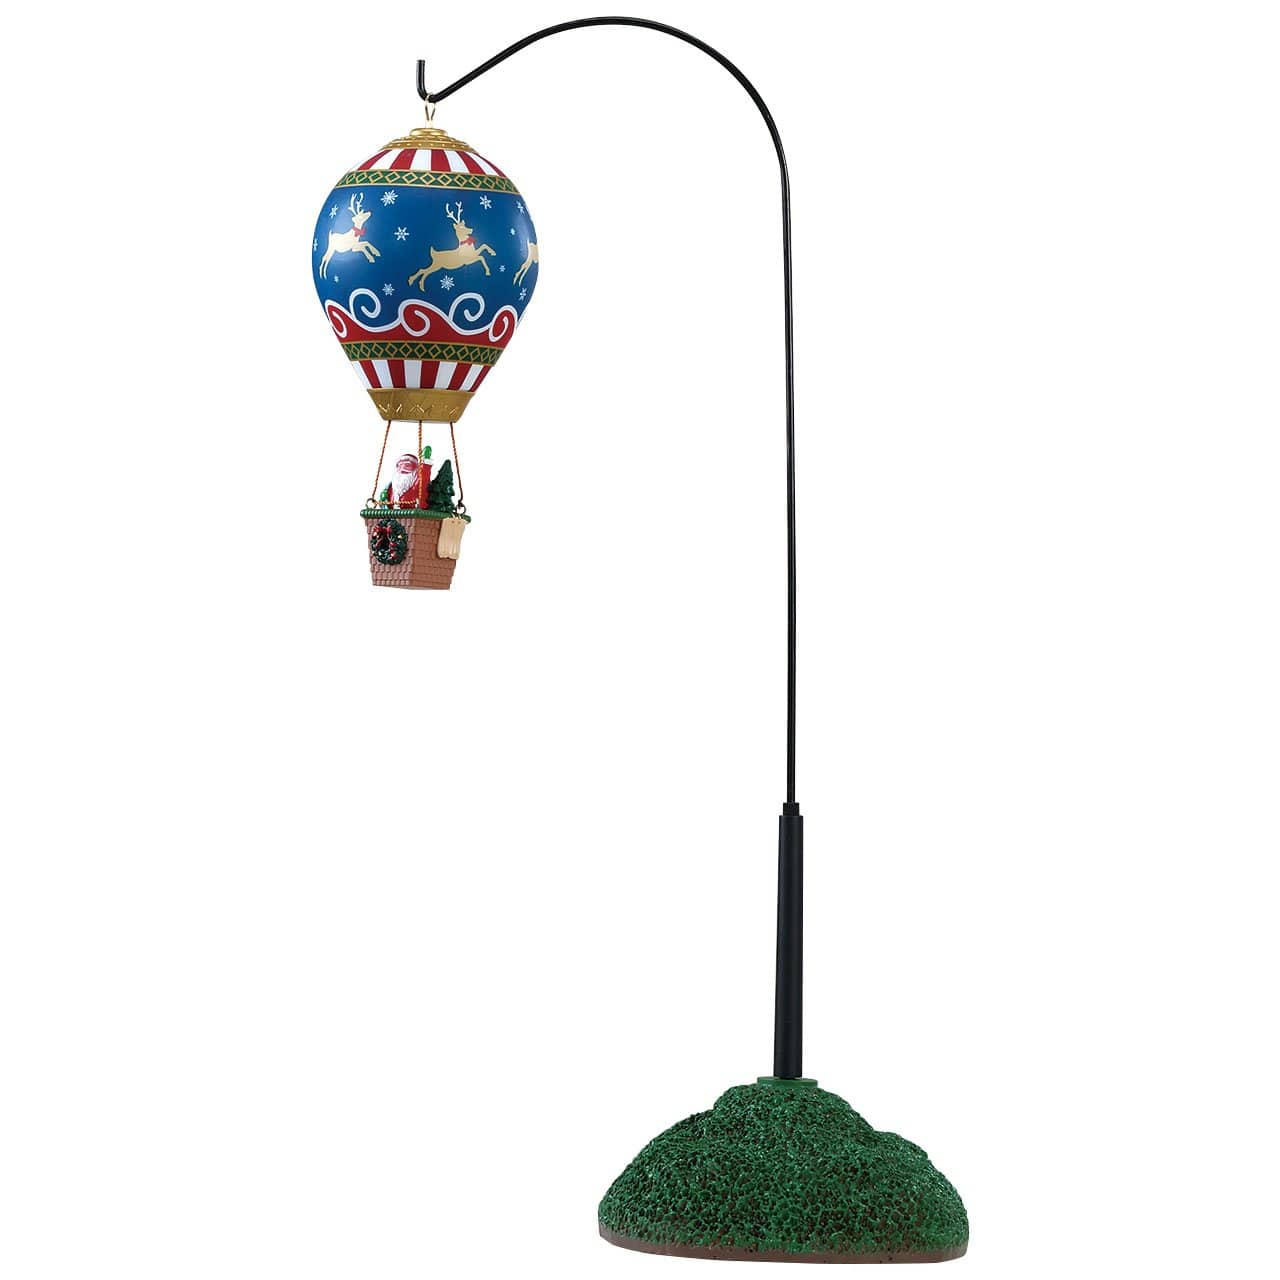 Lemax Table Pieces Lemax Reindeer Hot Air Balloon, Christmas Village Table Piece, B/O(4.5V)